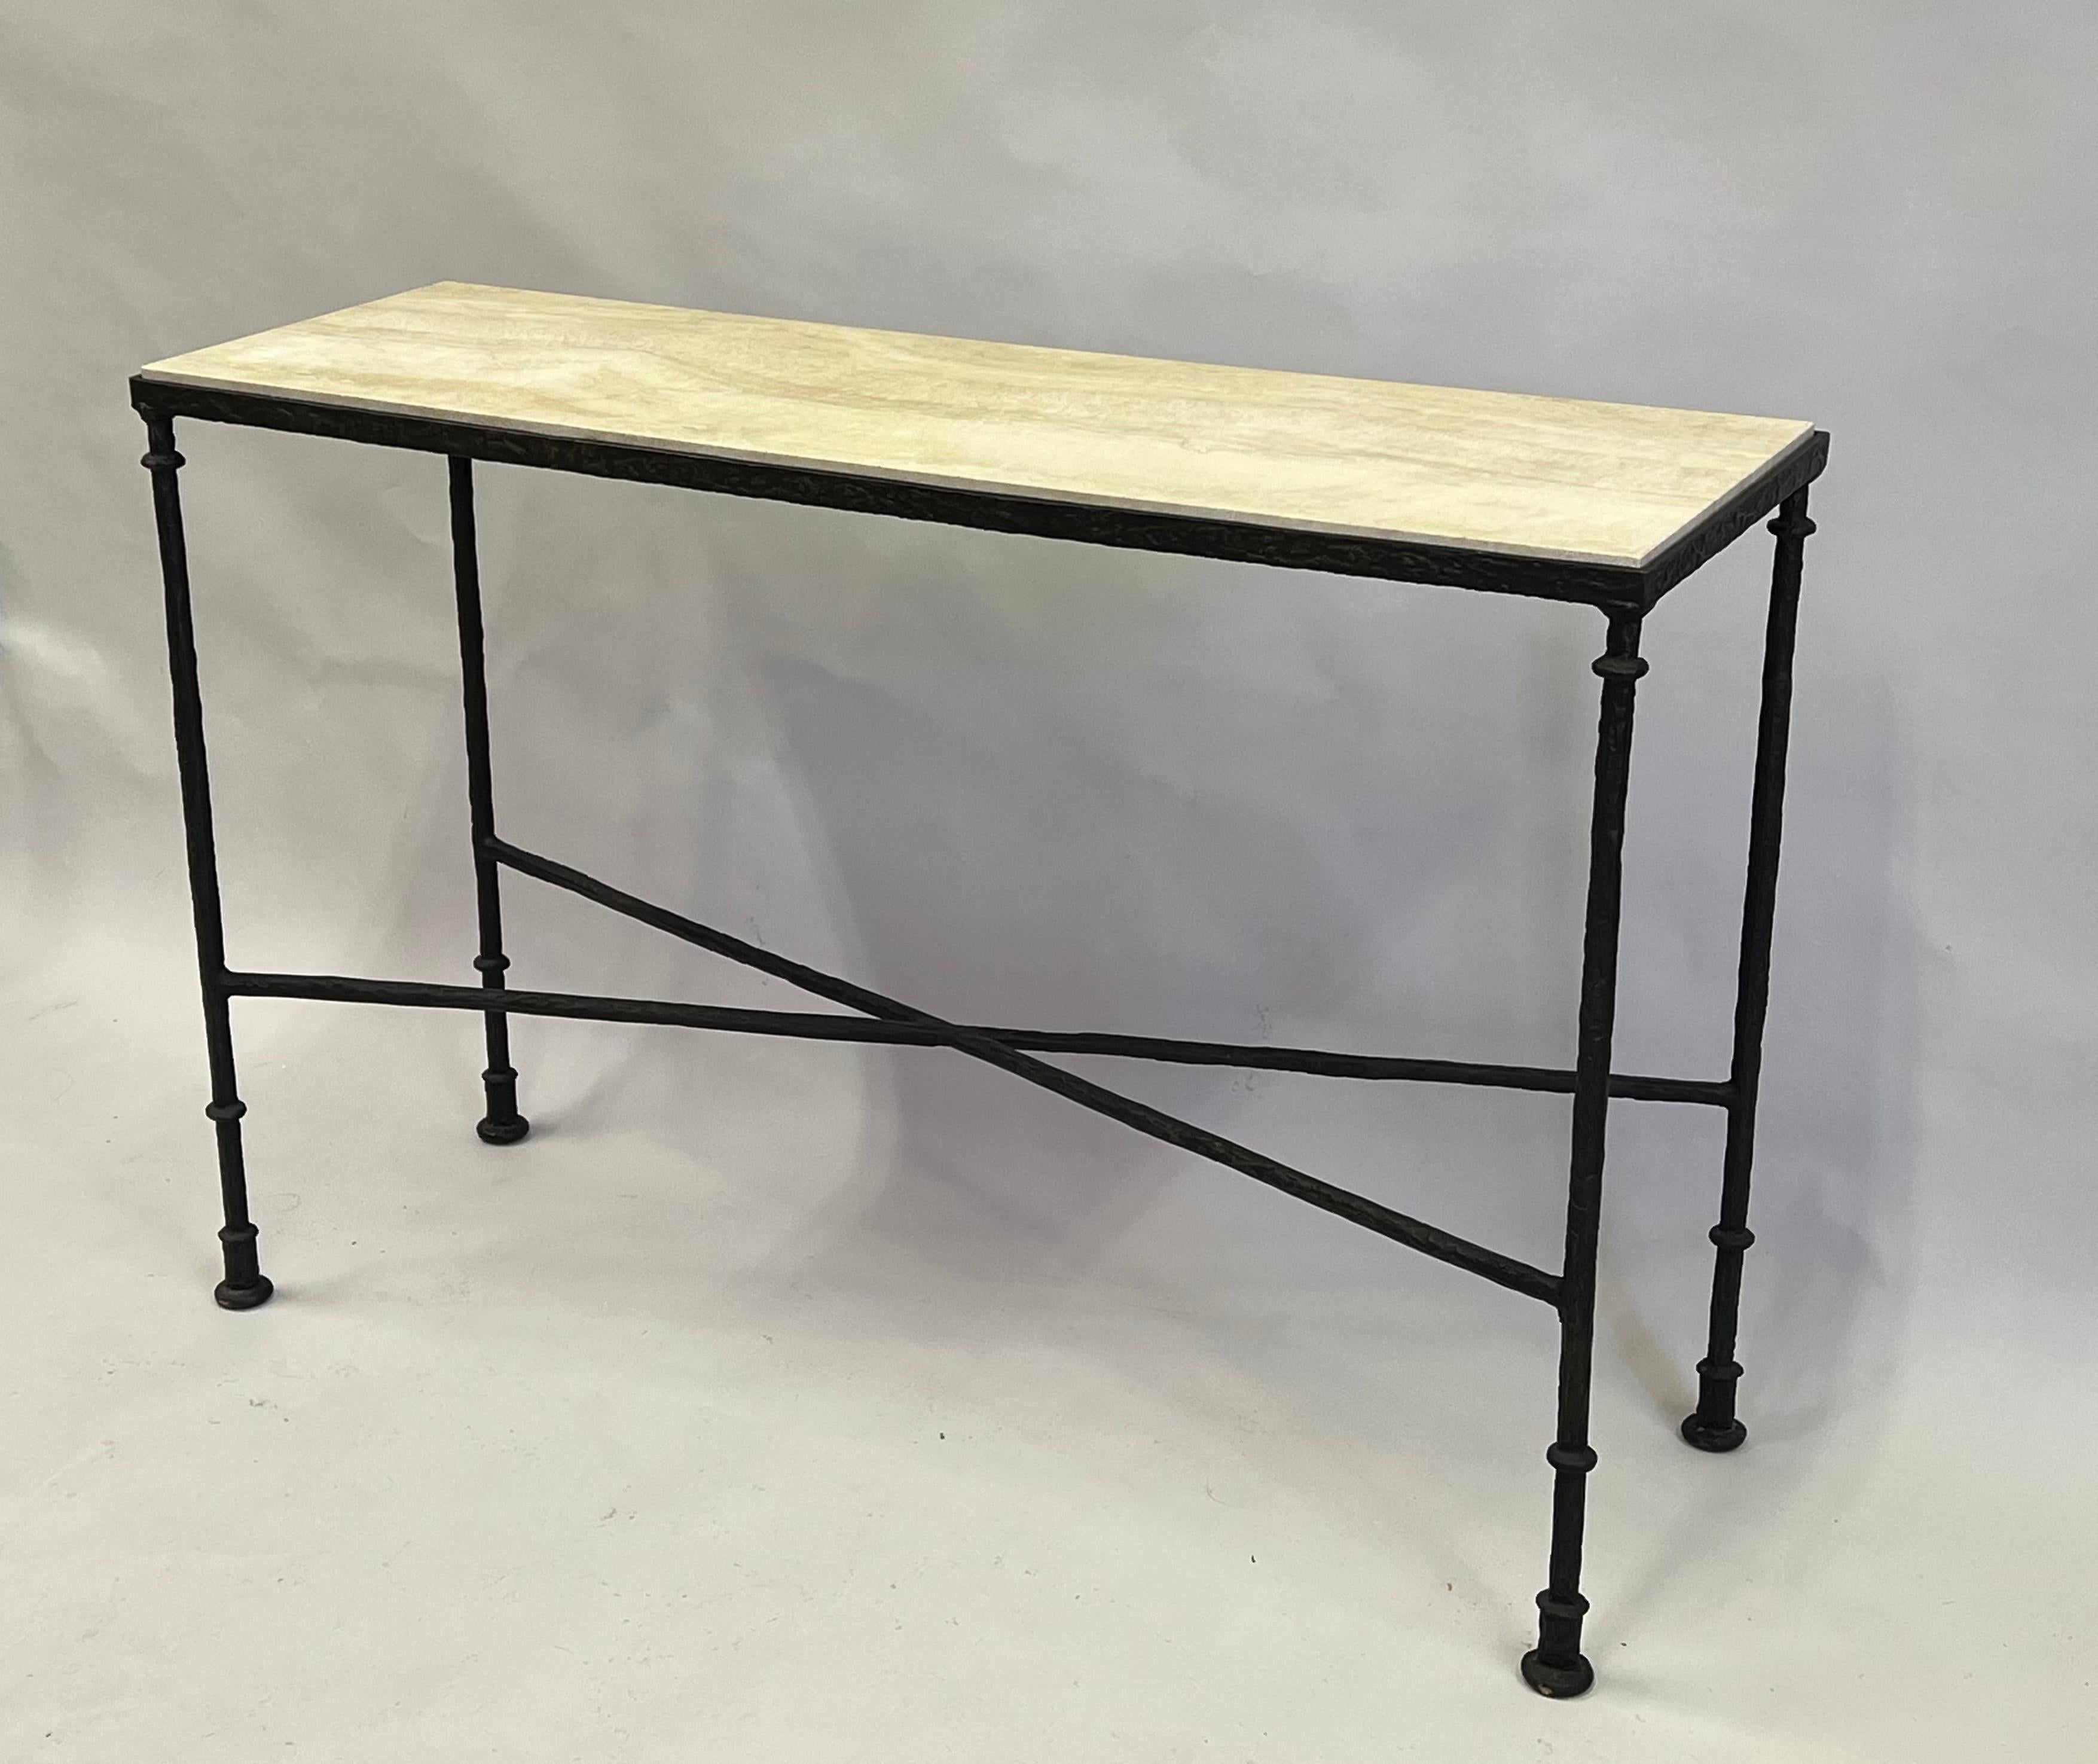 20th Century French Midcentury Bronze & Travertine Console, Jean-Michel Frank For Sale